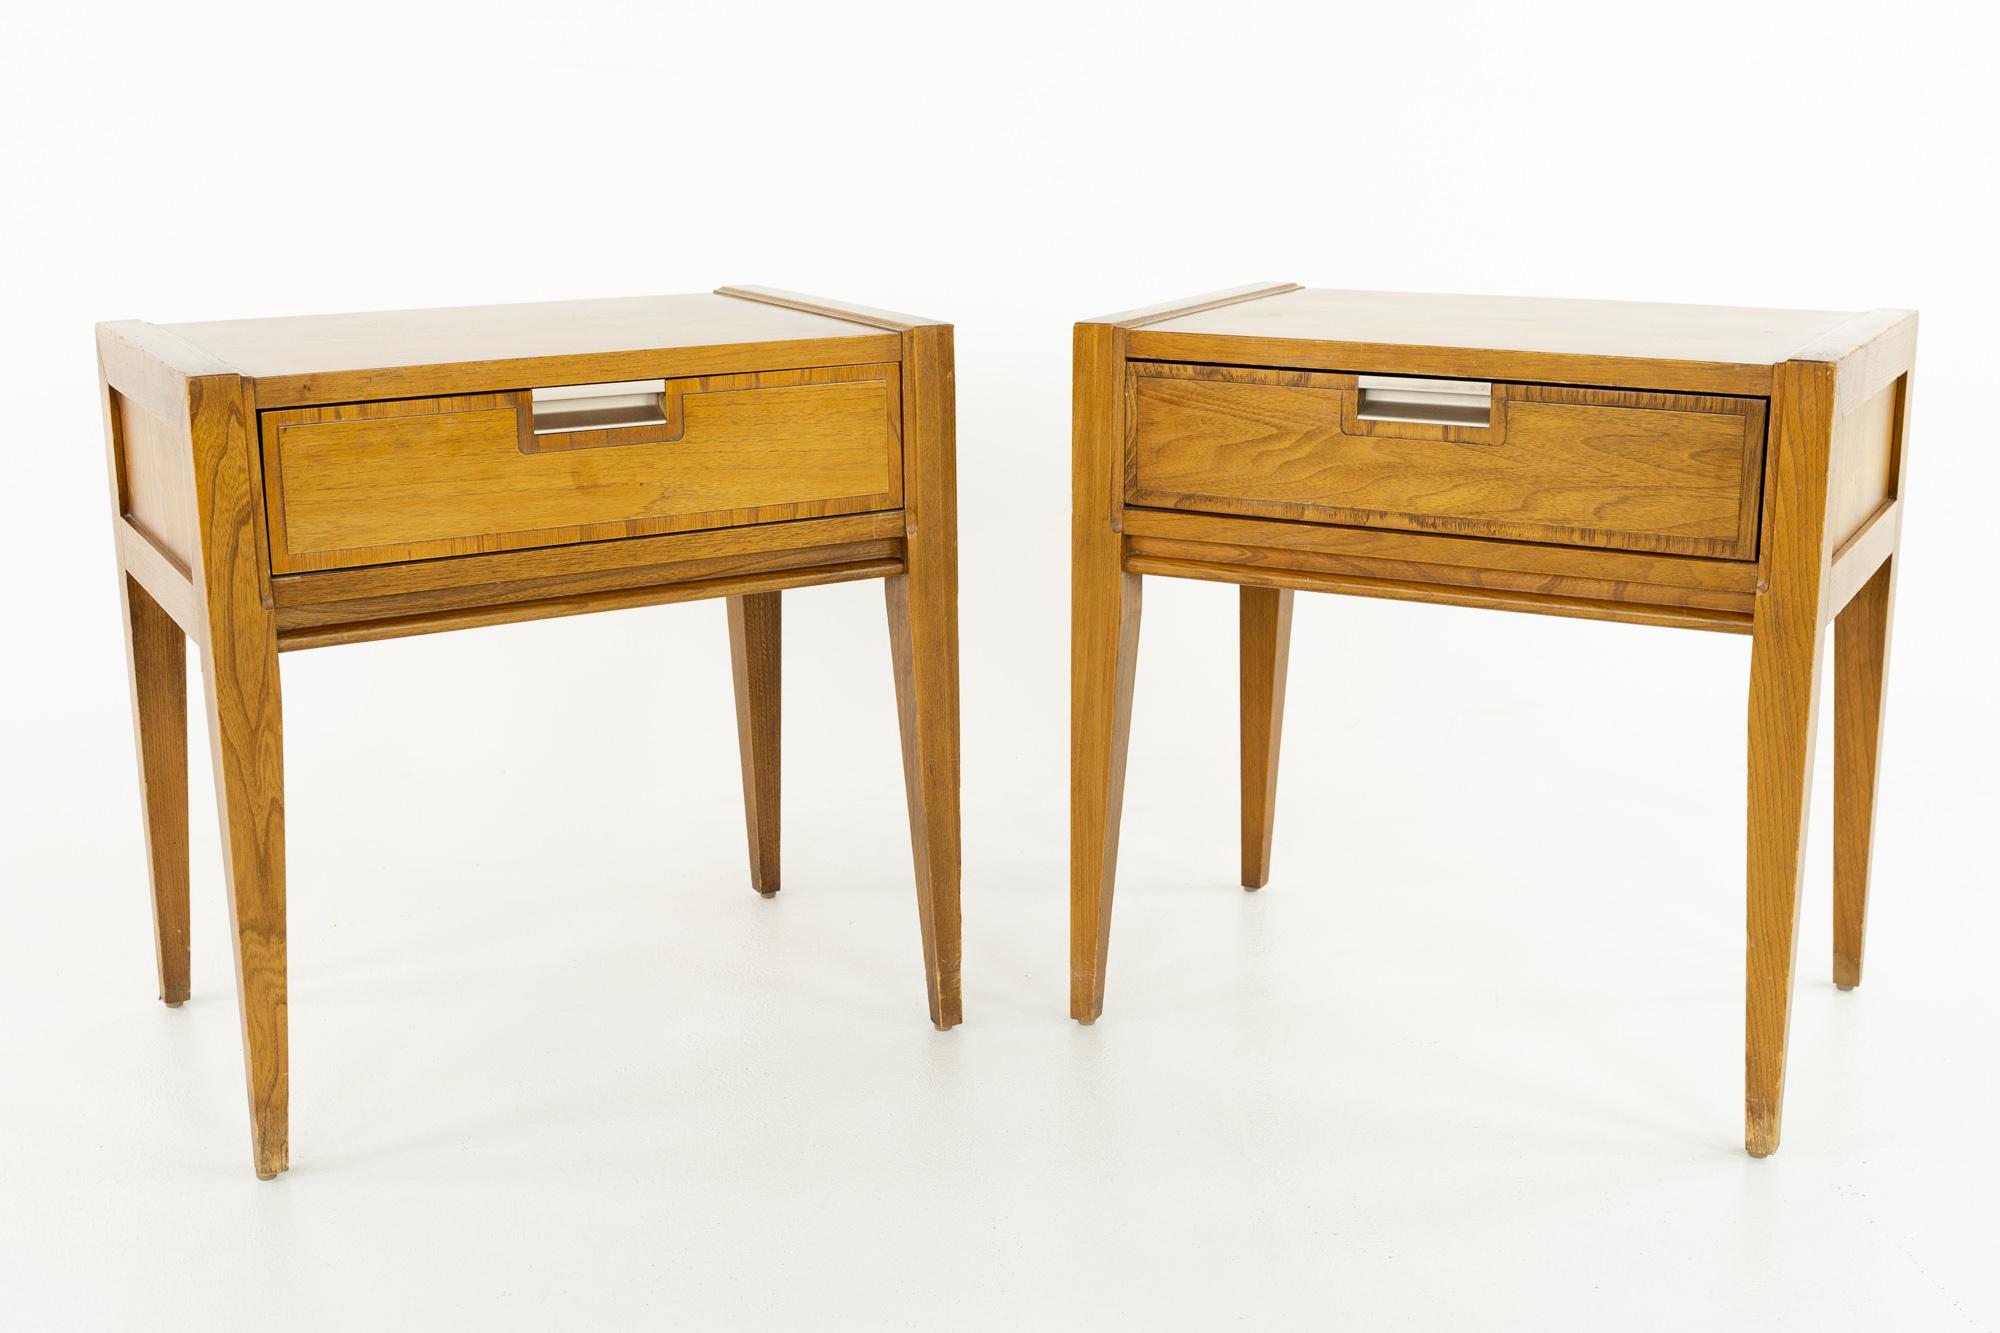 Basic Witz mid century walnut nightstands - pair

These nightstands measure: 22 wide x 15 deep x 22.5 inches high

?All pieces of furniture can be had in what we call restored vintage condition. That means the piece is restored upon purchase so